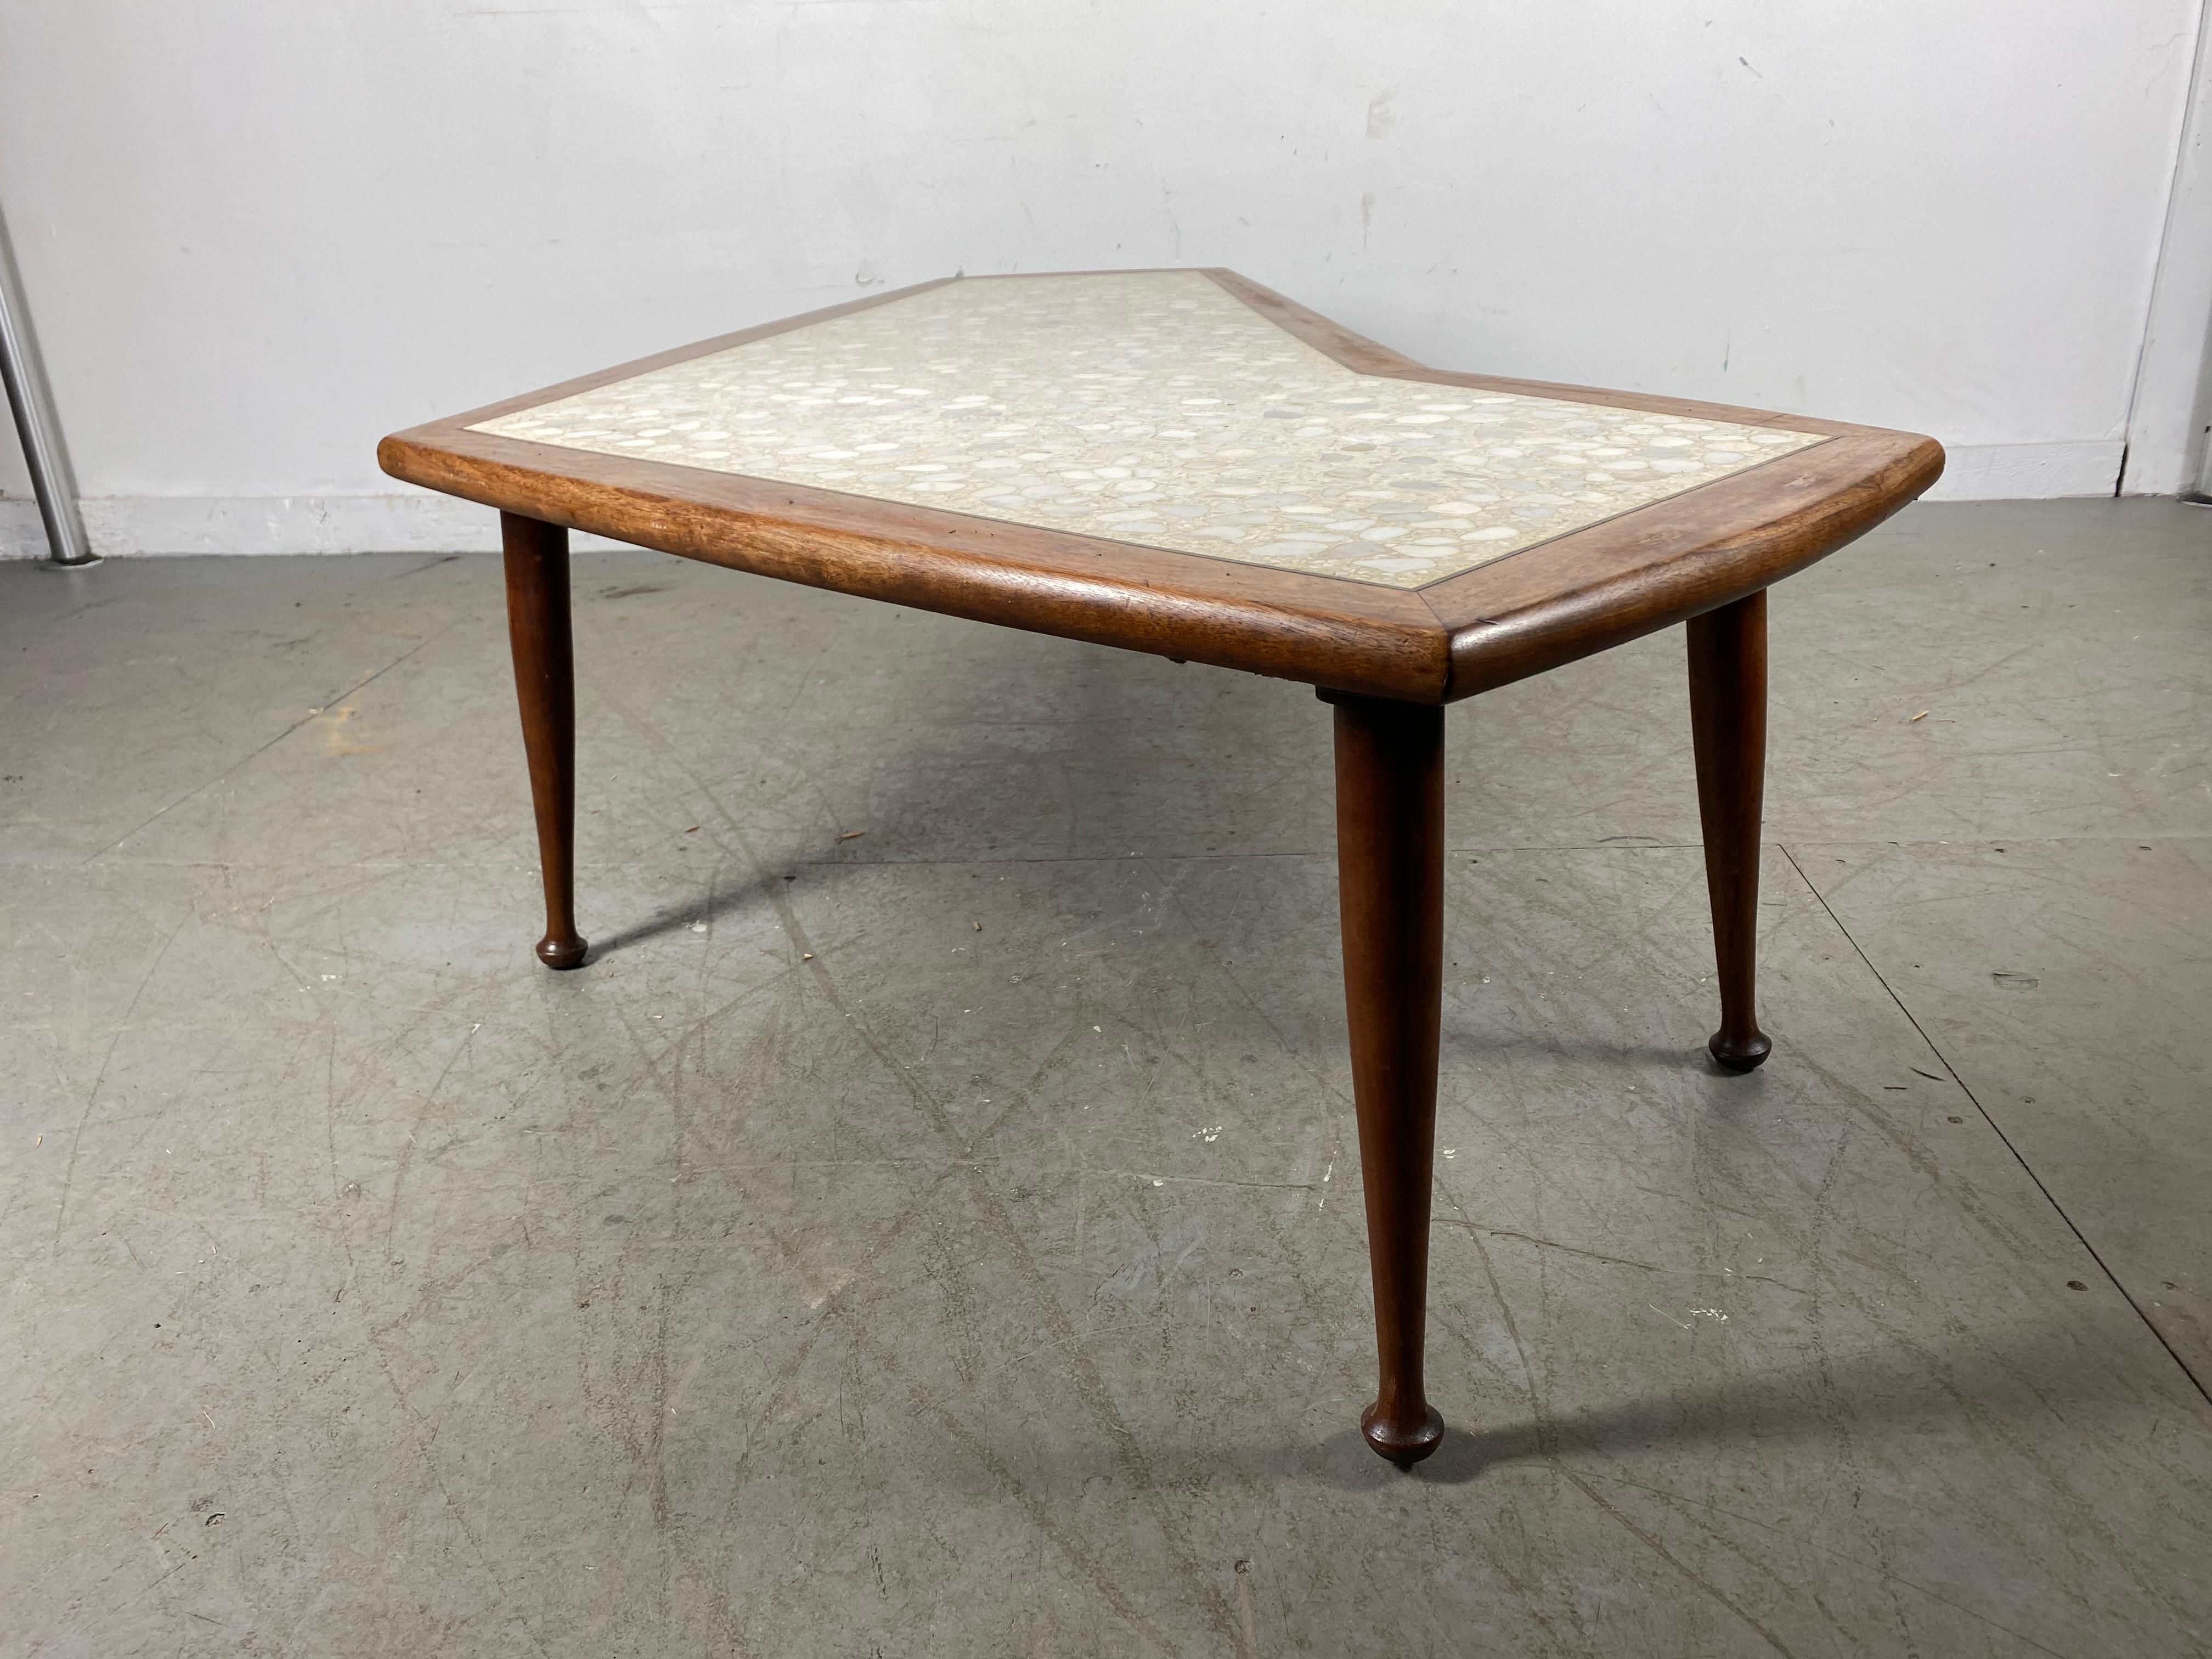 Mid-20th Century Classic American Modernist Walnut and Stone Boomerang Coffee/ Cocktail Table